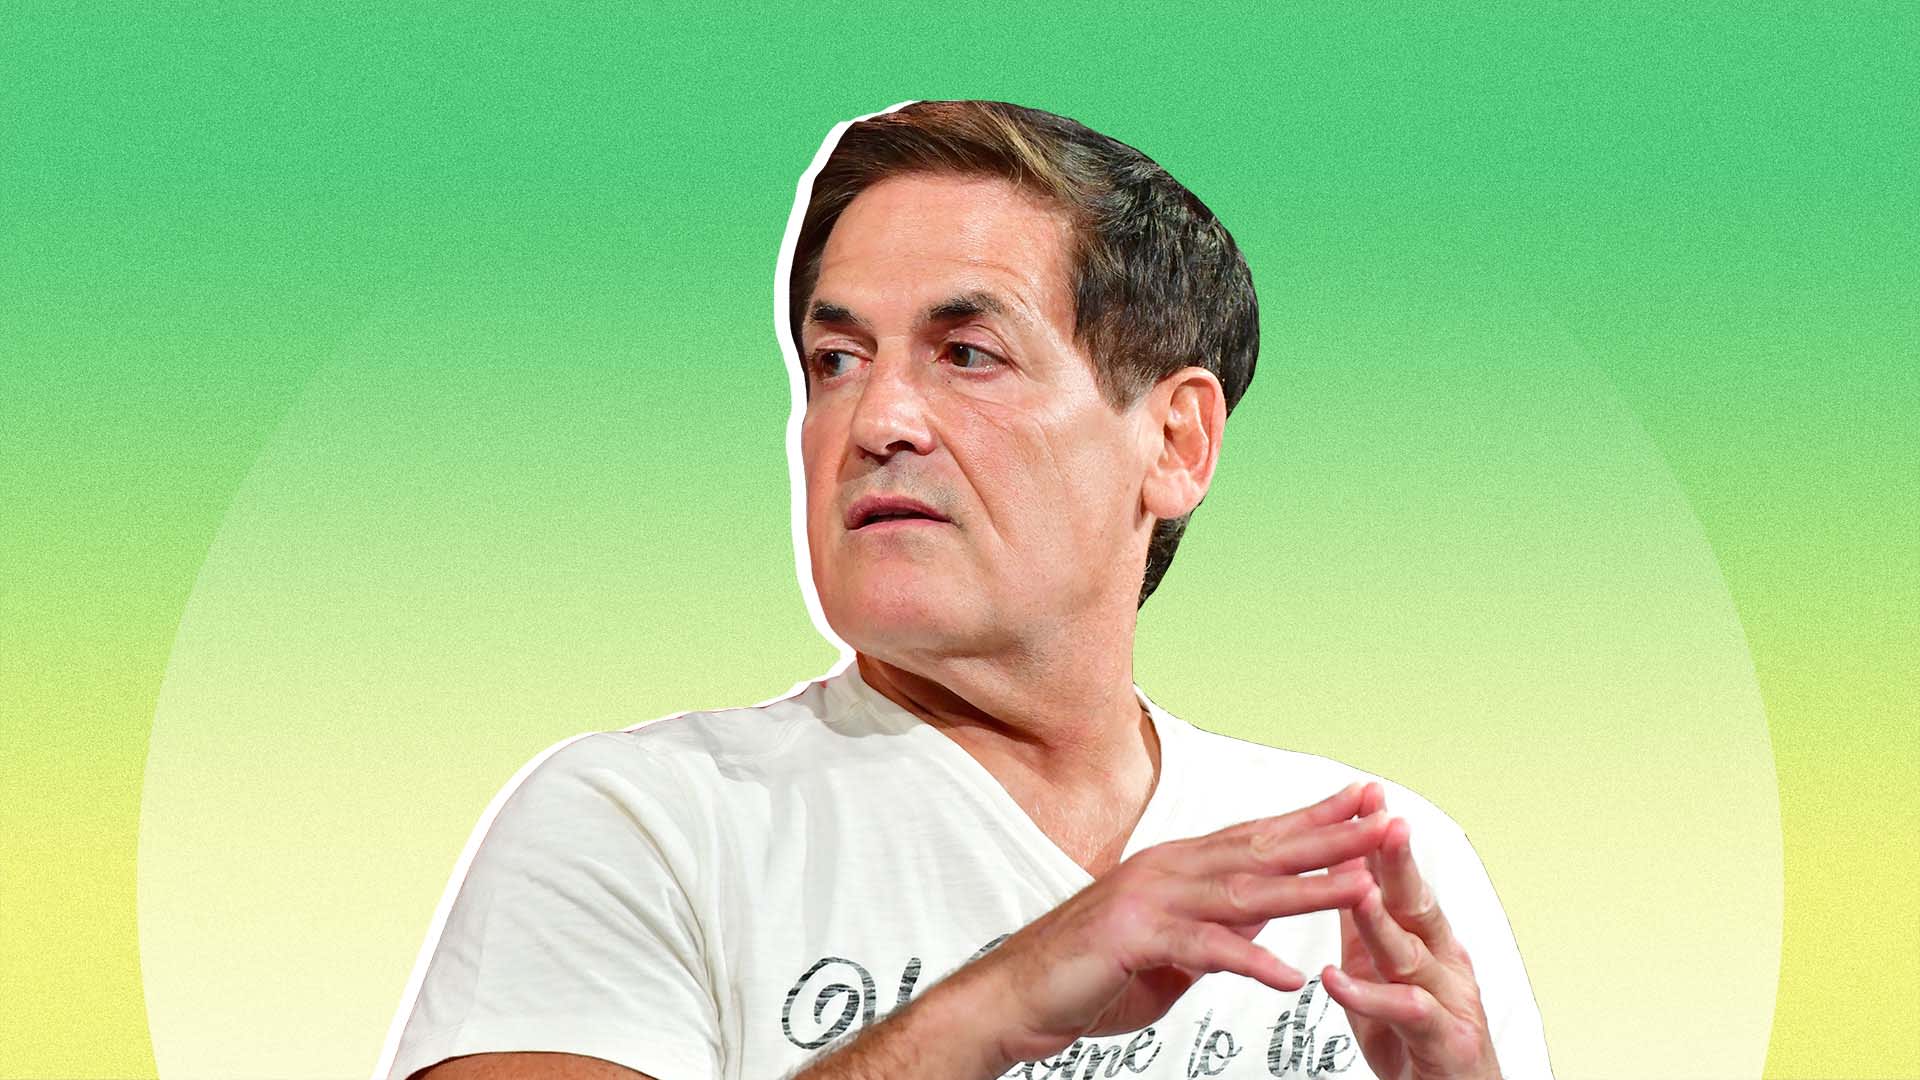 Mark Cuban Says the Worst Career Advice Is 'Follow Your Passion.' What Should You Do Instead?